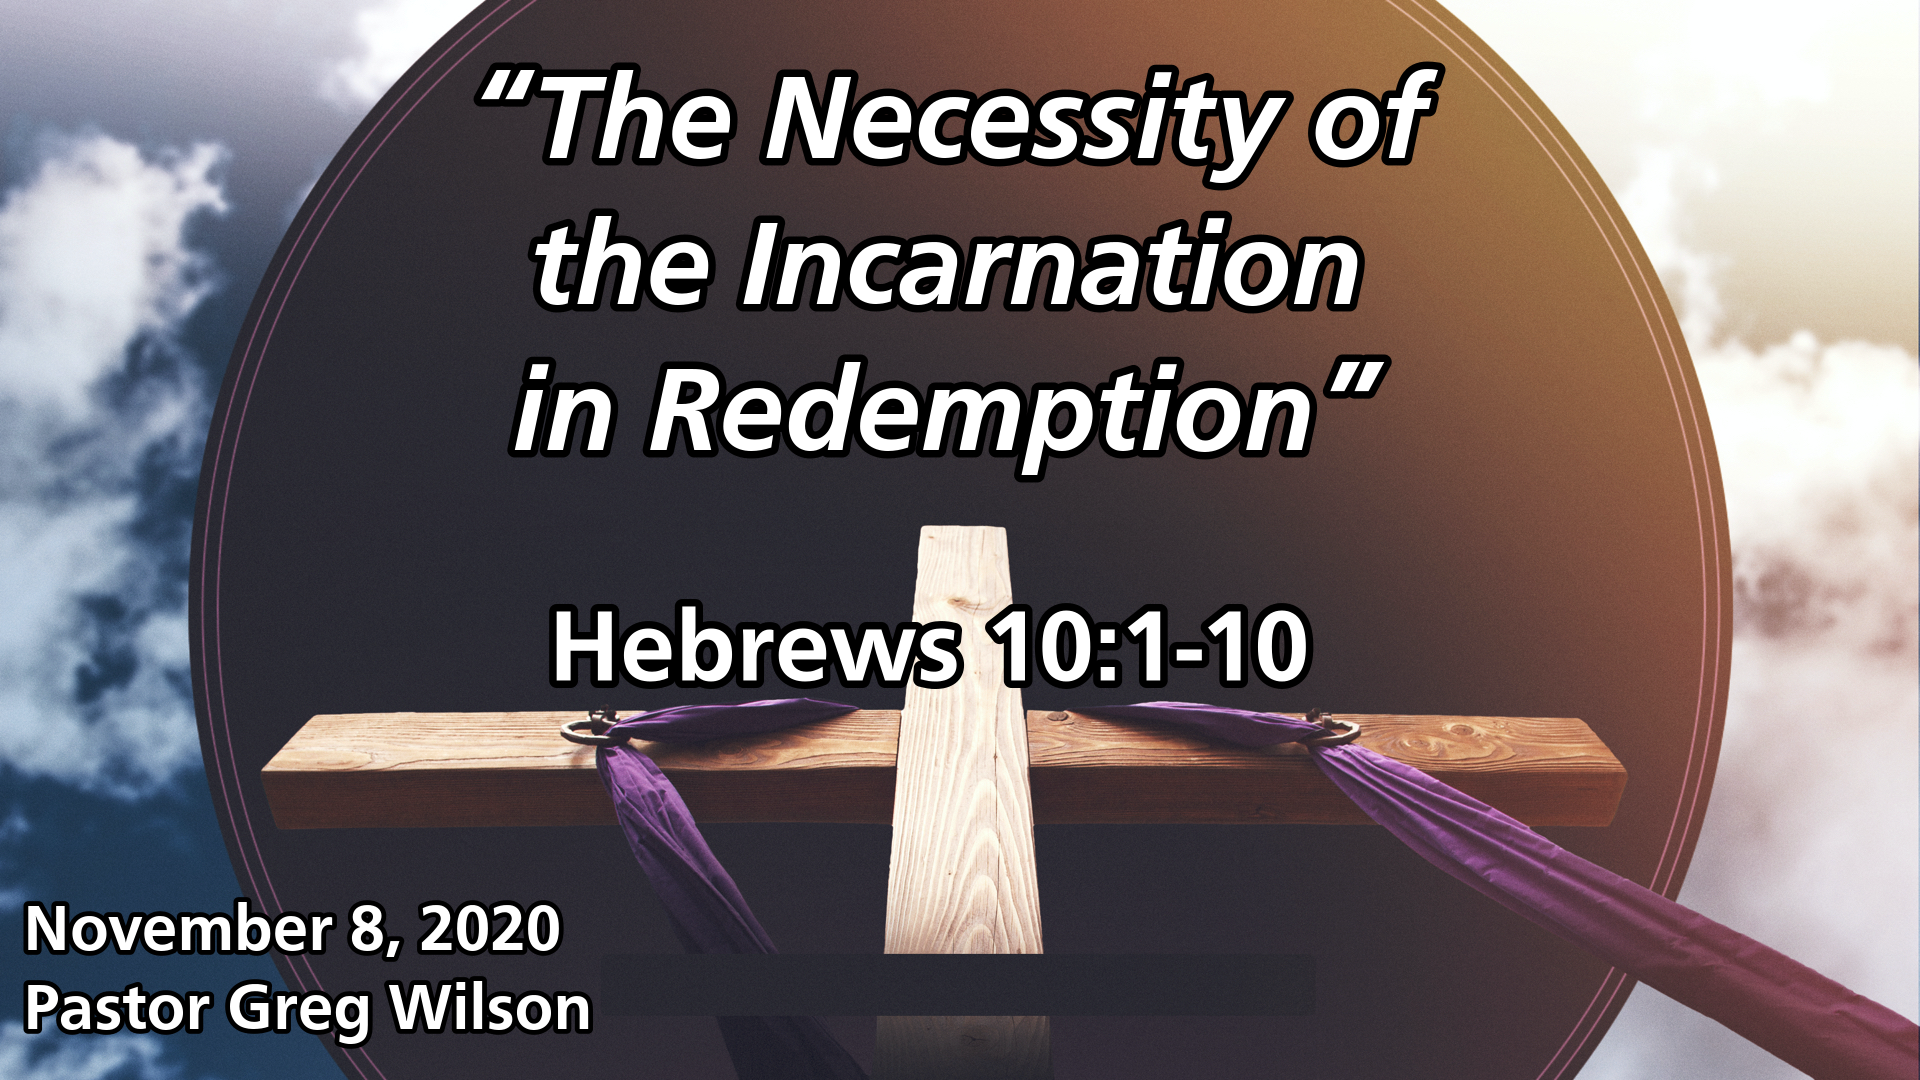 “The Necessity of the Incarnation in Redemption”